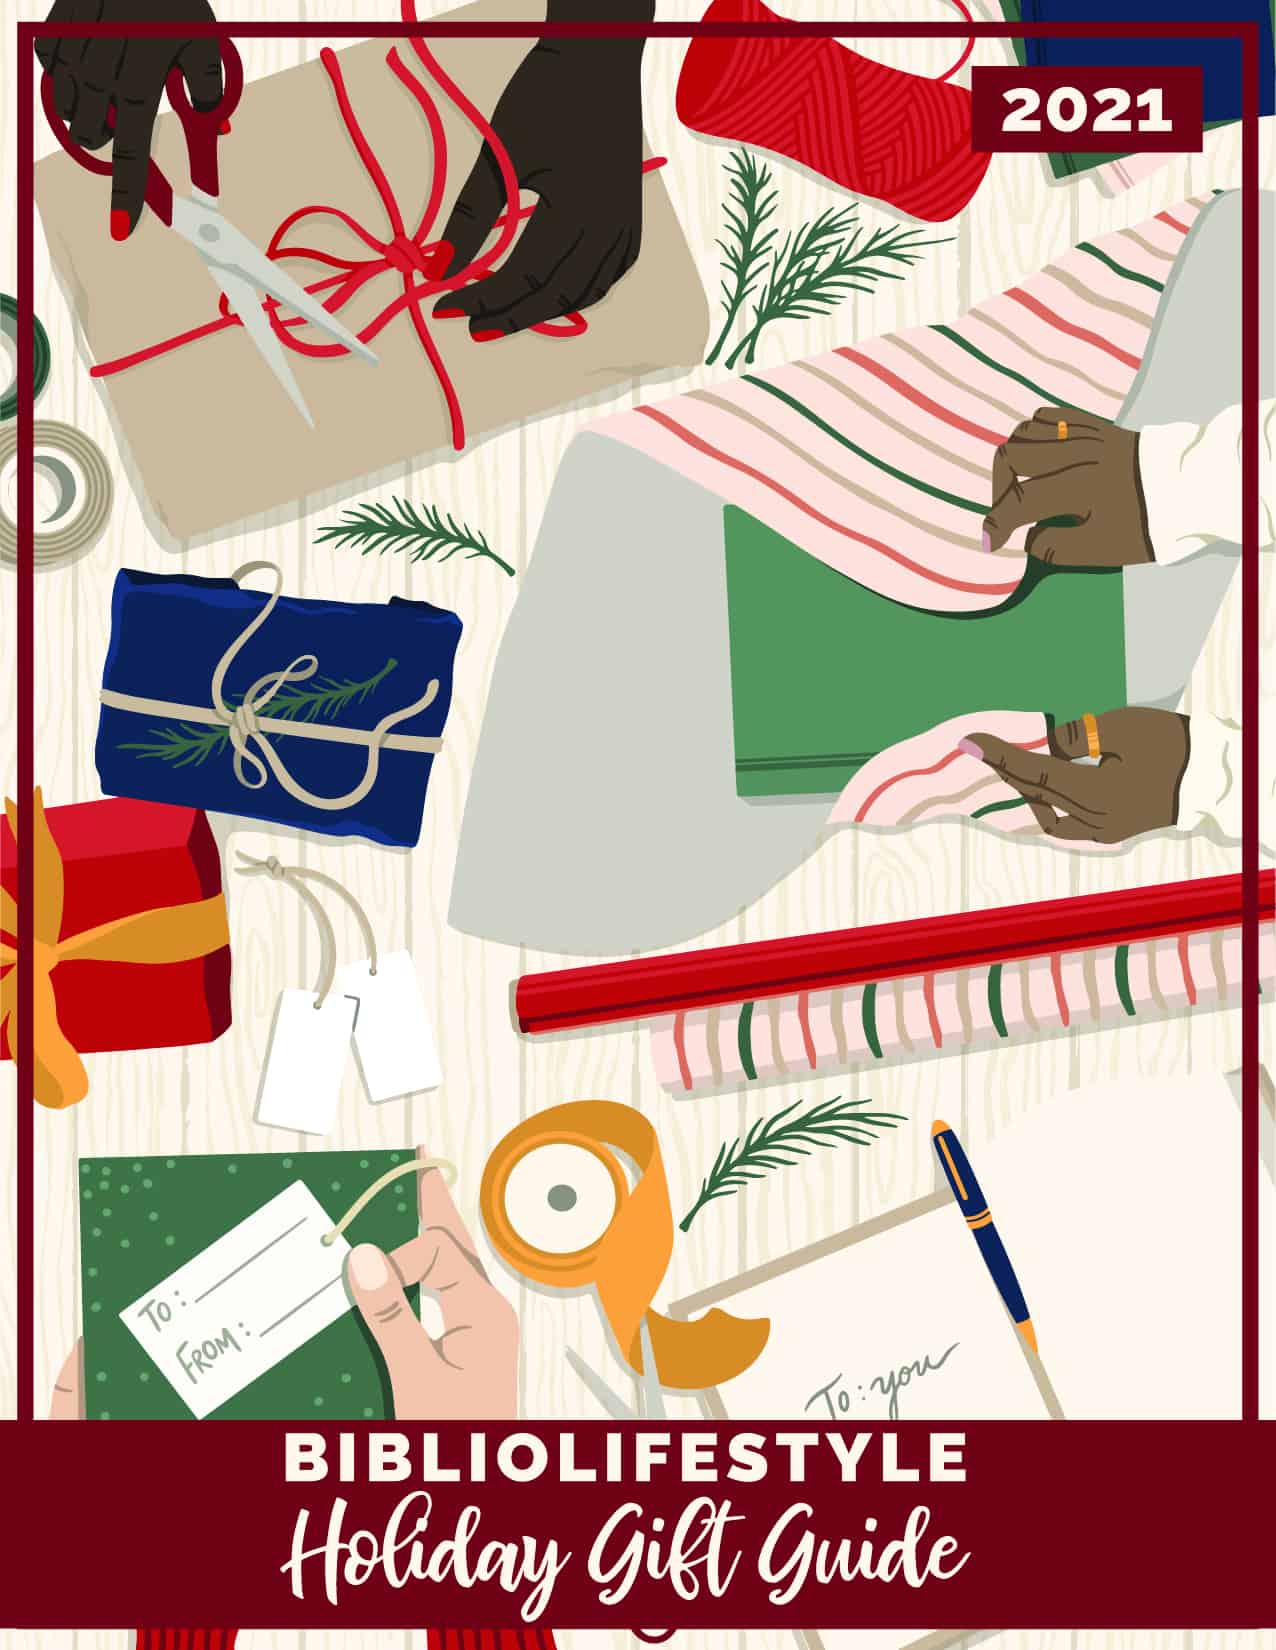 The 2021 BiblioLifestyle Holiday Gift. Guide